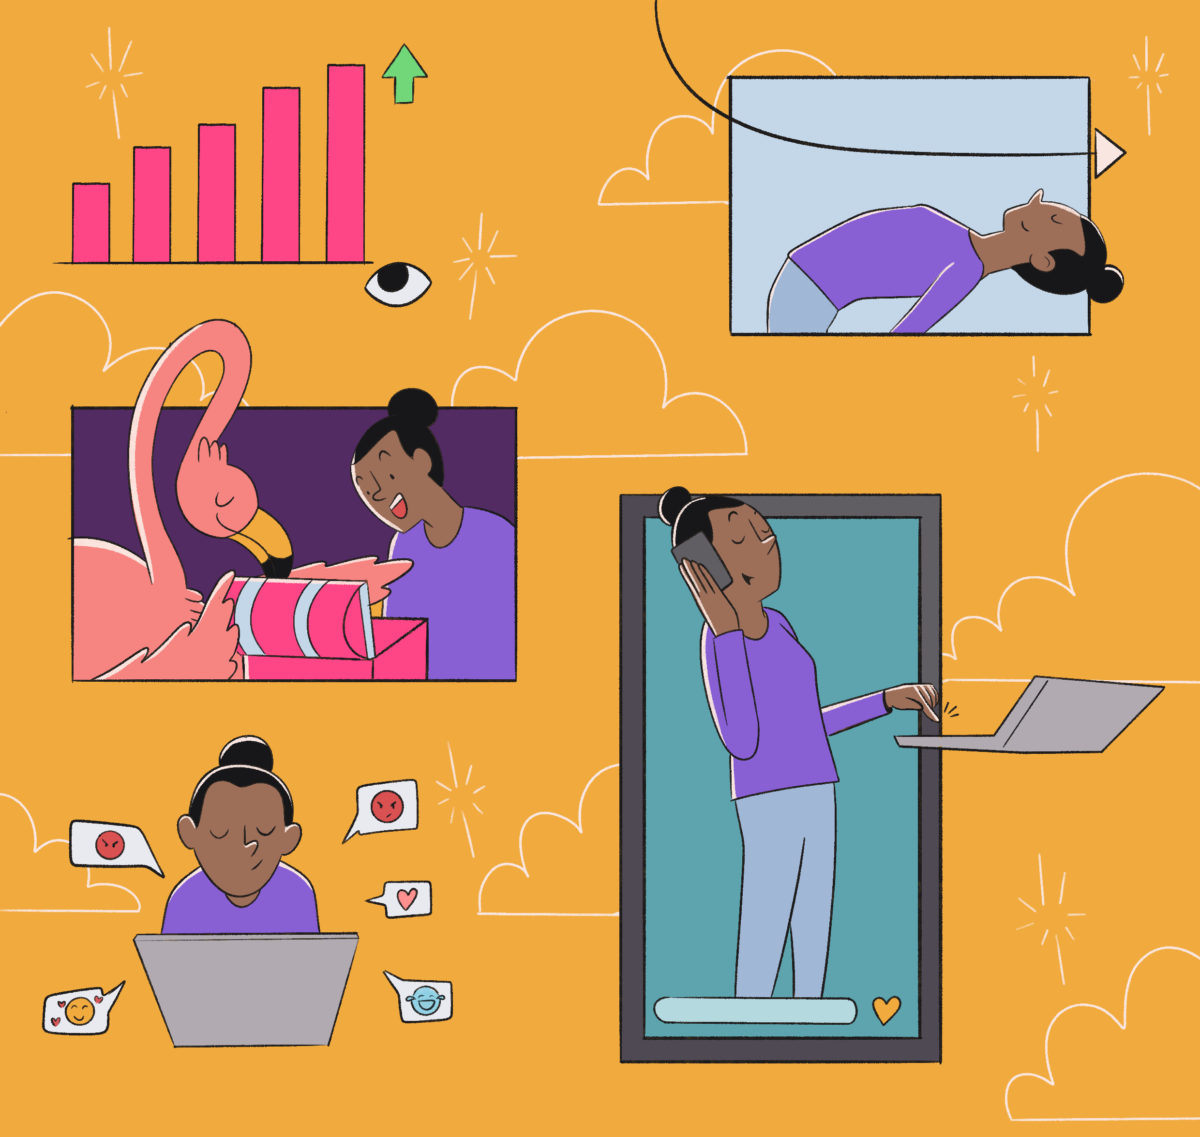 Illustration depicting various aspects of daily life: exercising, working on a laptop, sleeping, and looking out of a window, with background elements indicating digital connectivity and personal growth.